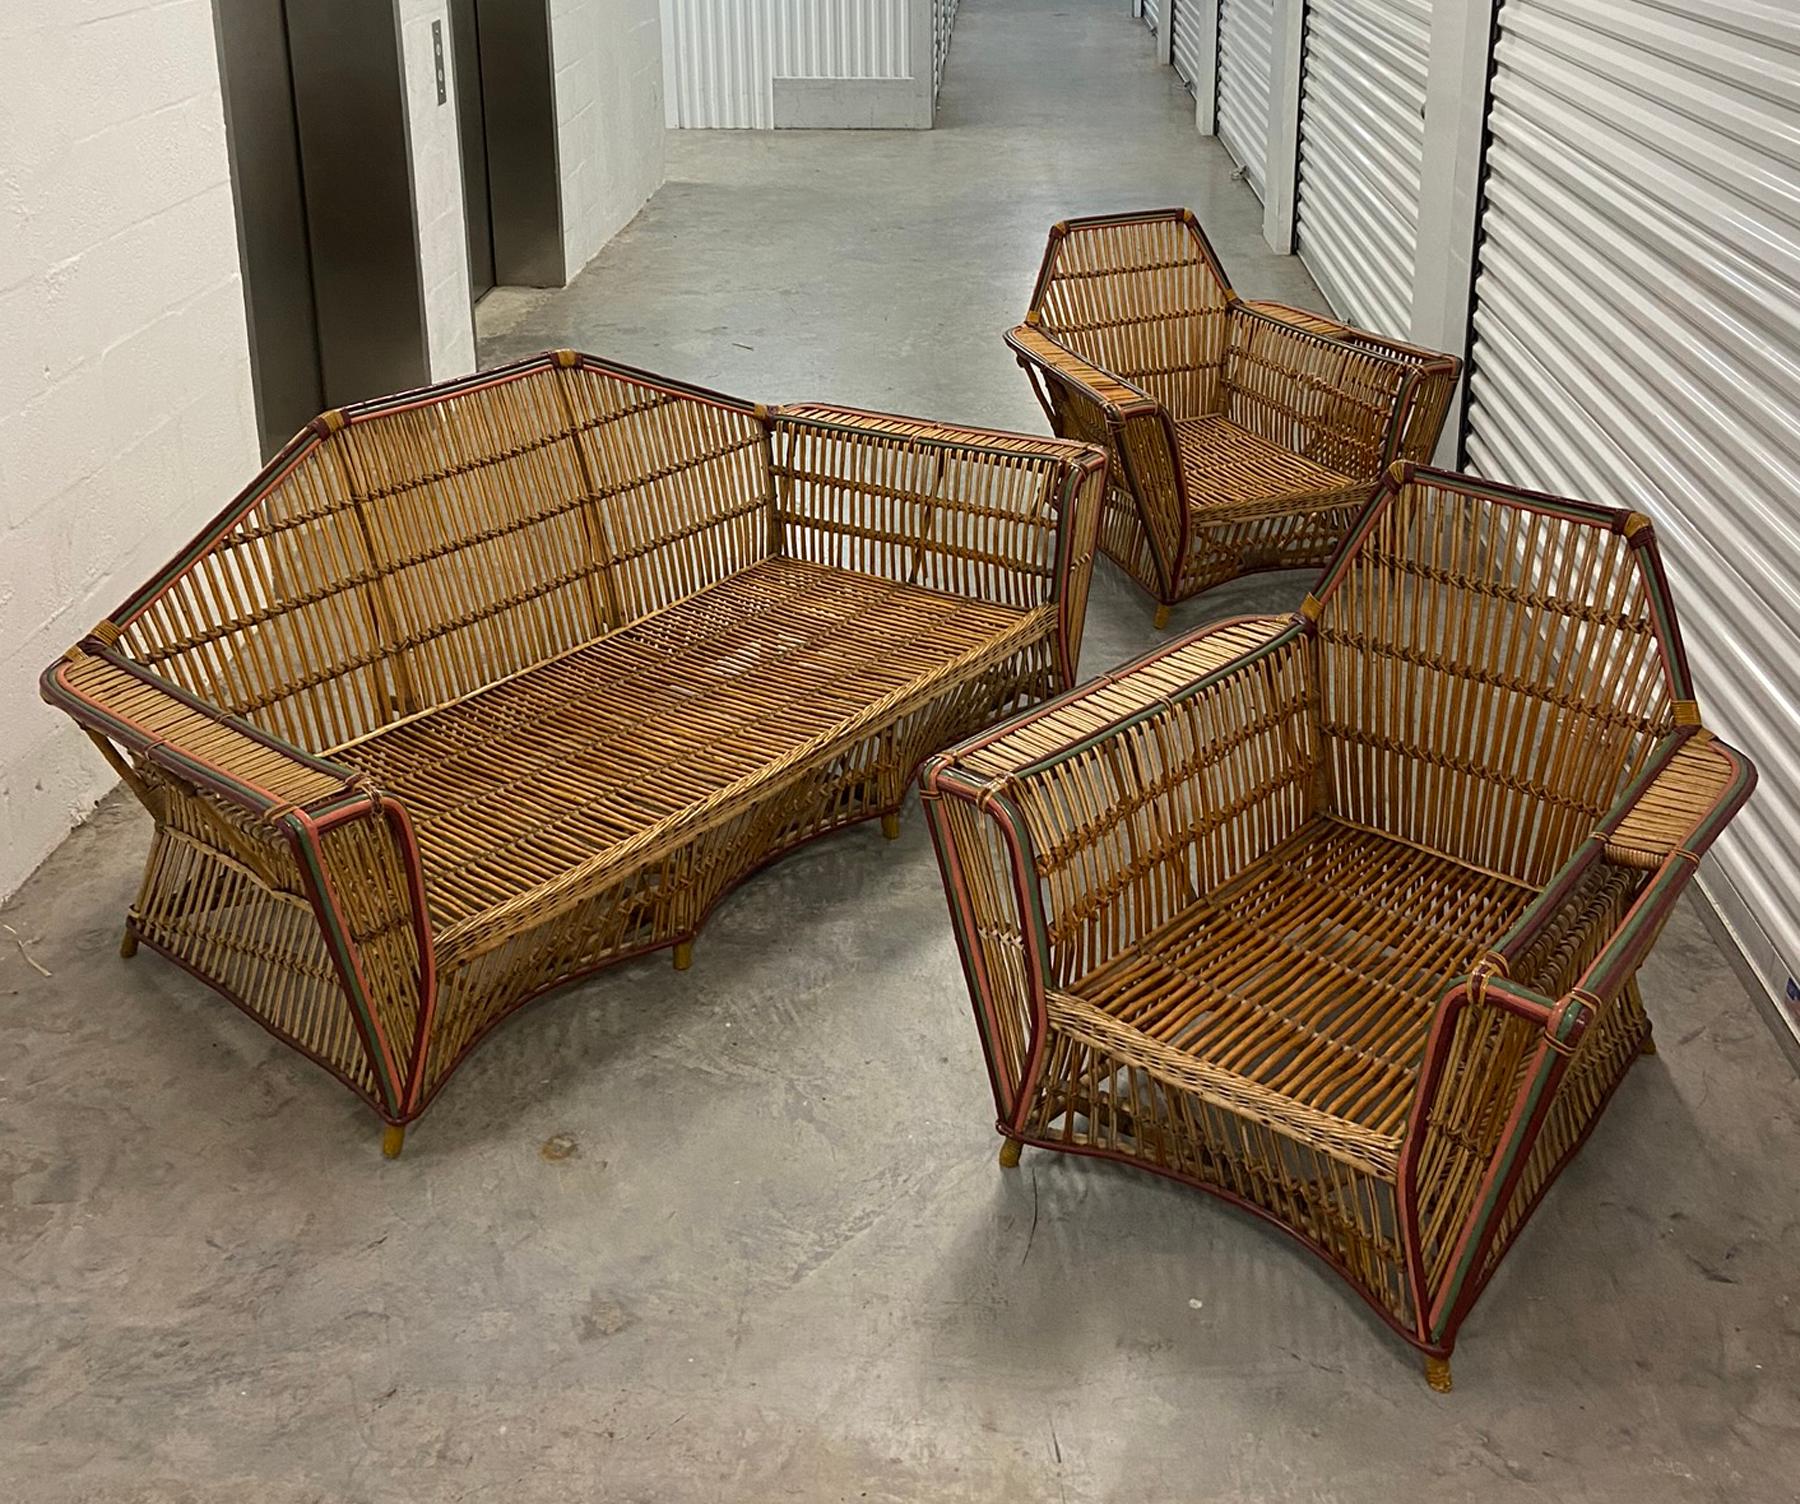 1920s three-piece American split reed stick wicker living room suite. Sofa and two club lounge chairs. Retains original finish with some touch up and minor repairs. Has passable cushions but you probably want to have them re-worked and recovered